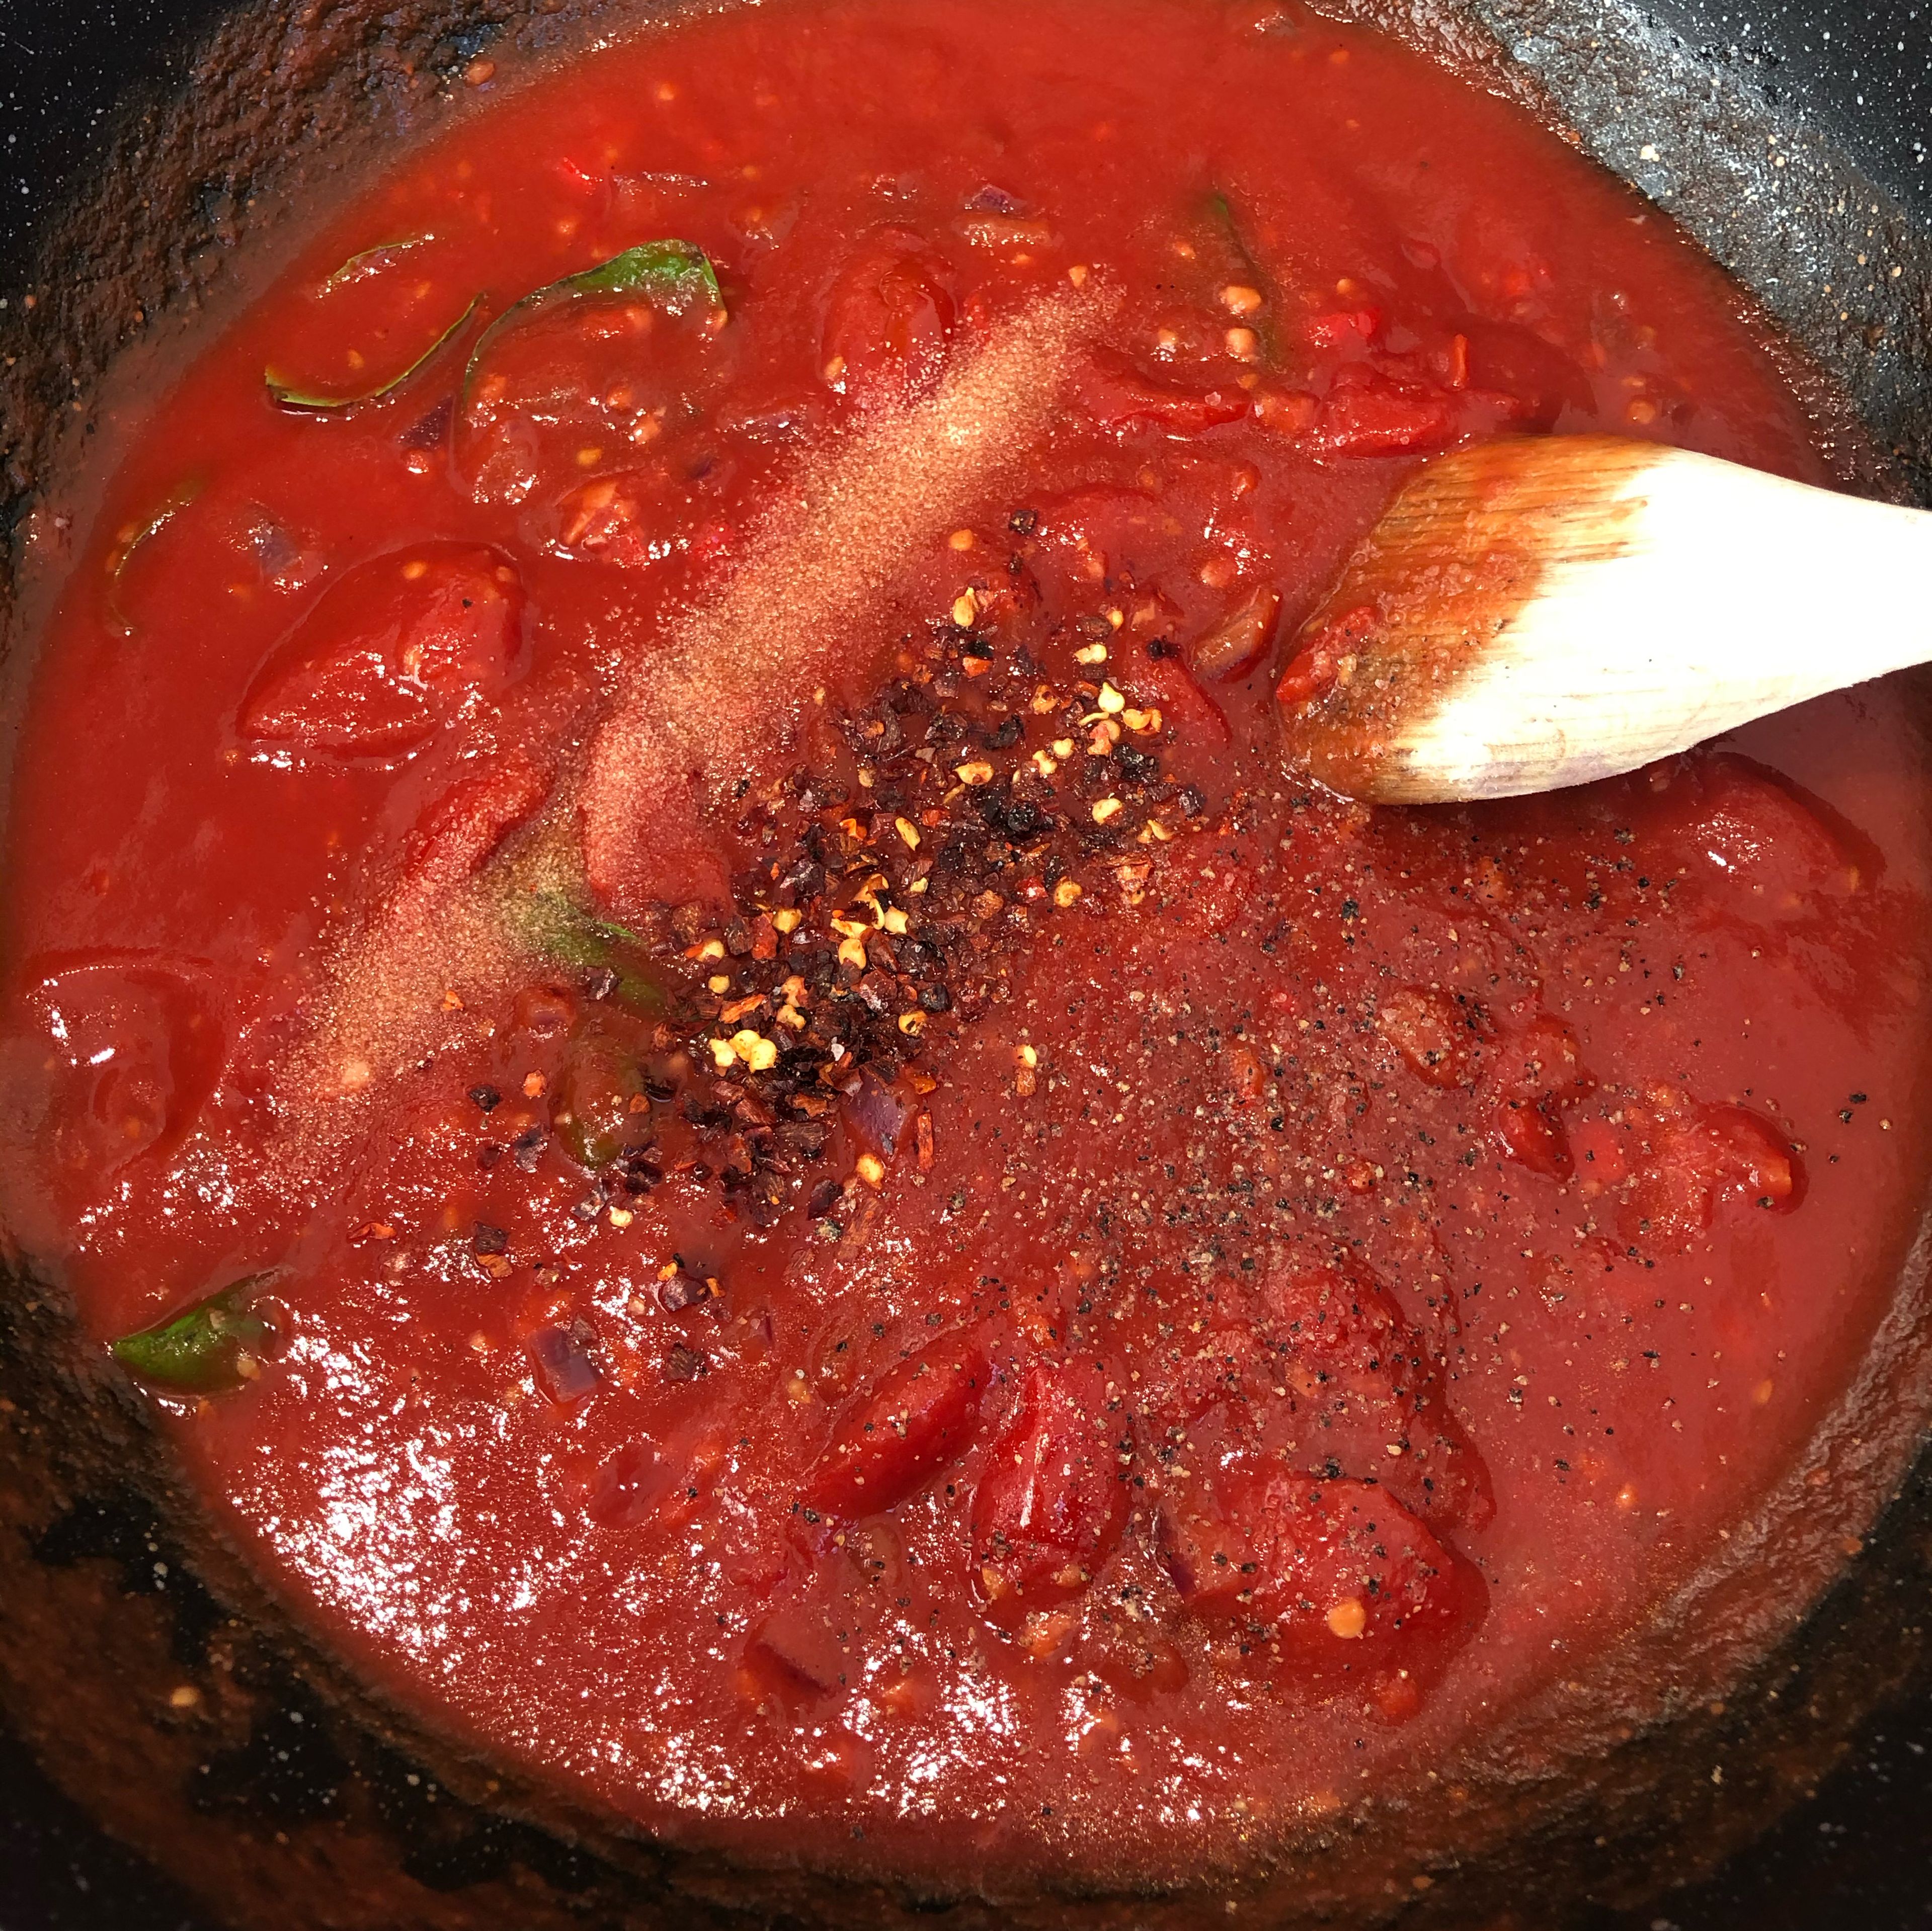 Add chili flakes (and add salt and pepper to the liking of your own taste). Stir on low-medium heat for a bit and add cooked pasta in the sauce pan.